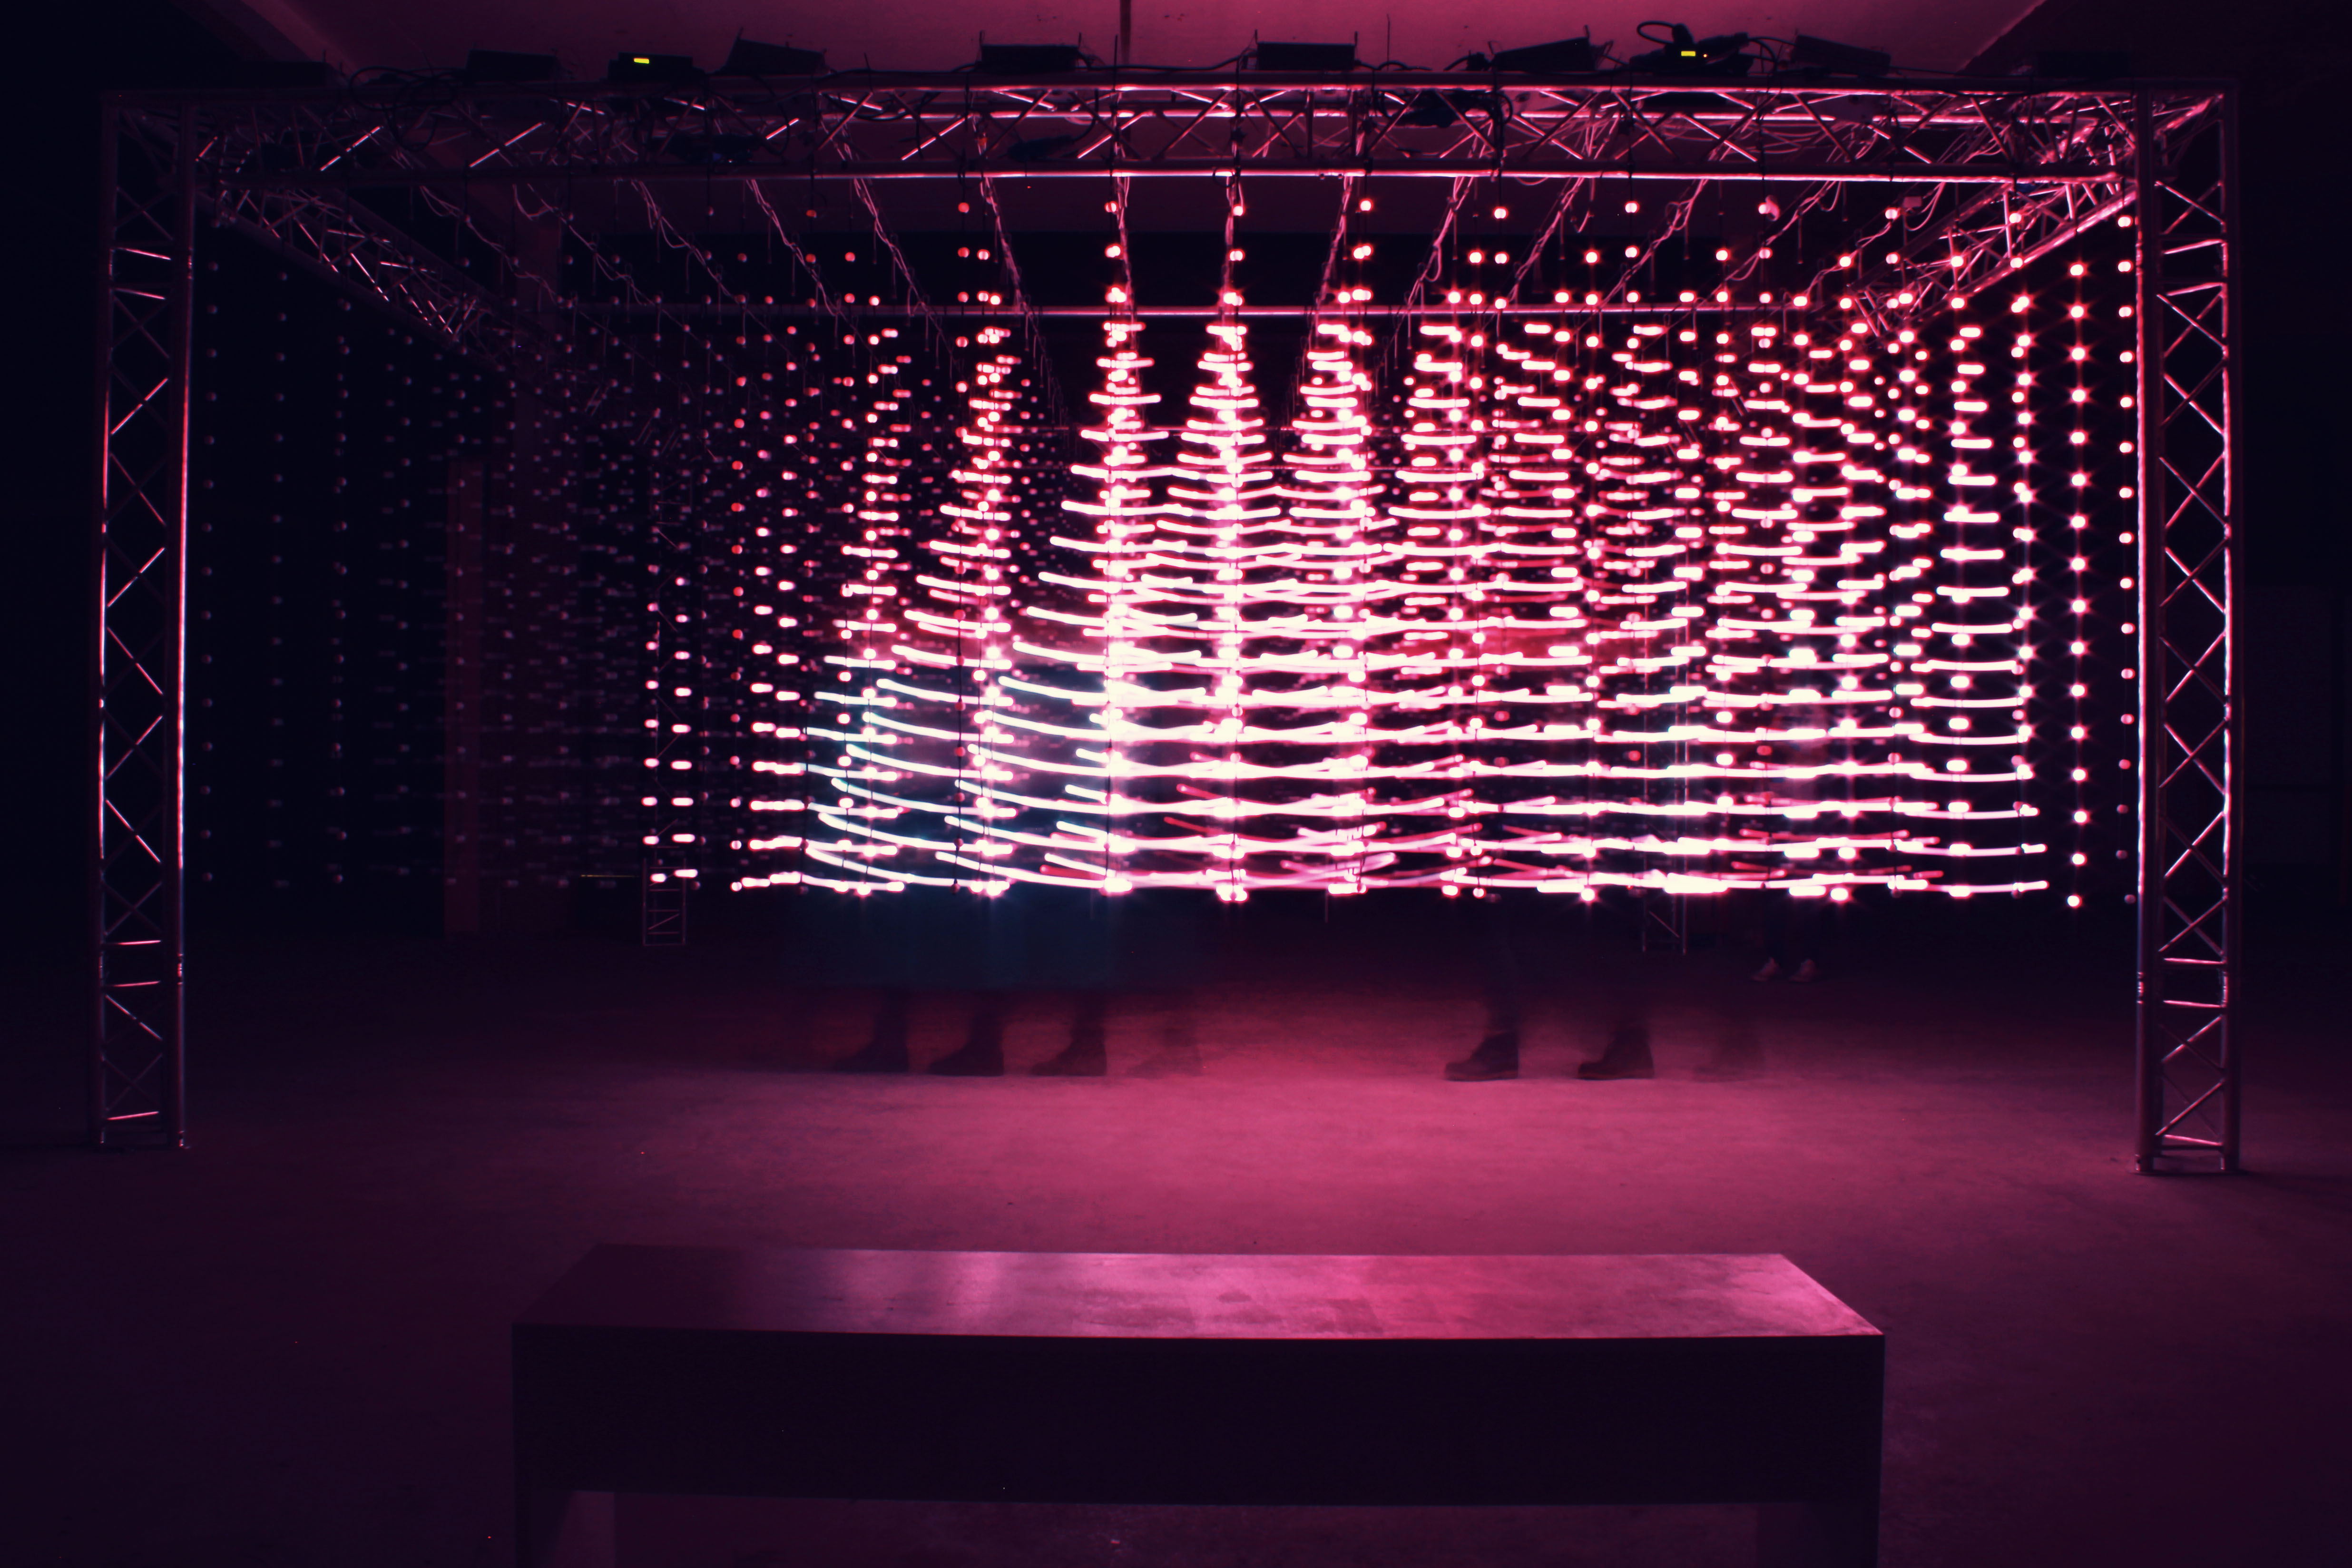 hundreds of white lights hanging from a metal frame with a red hue